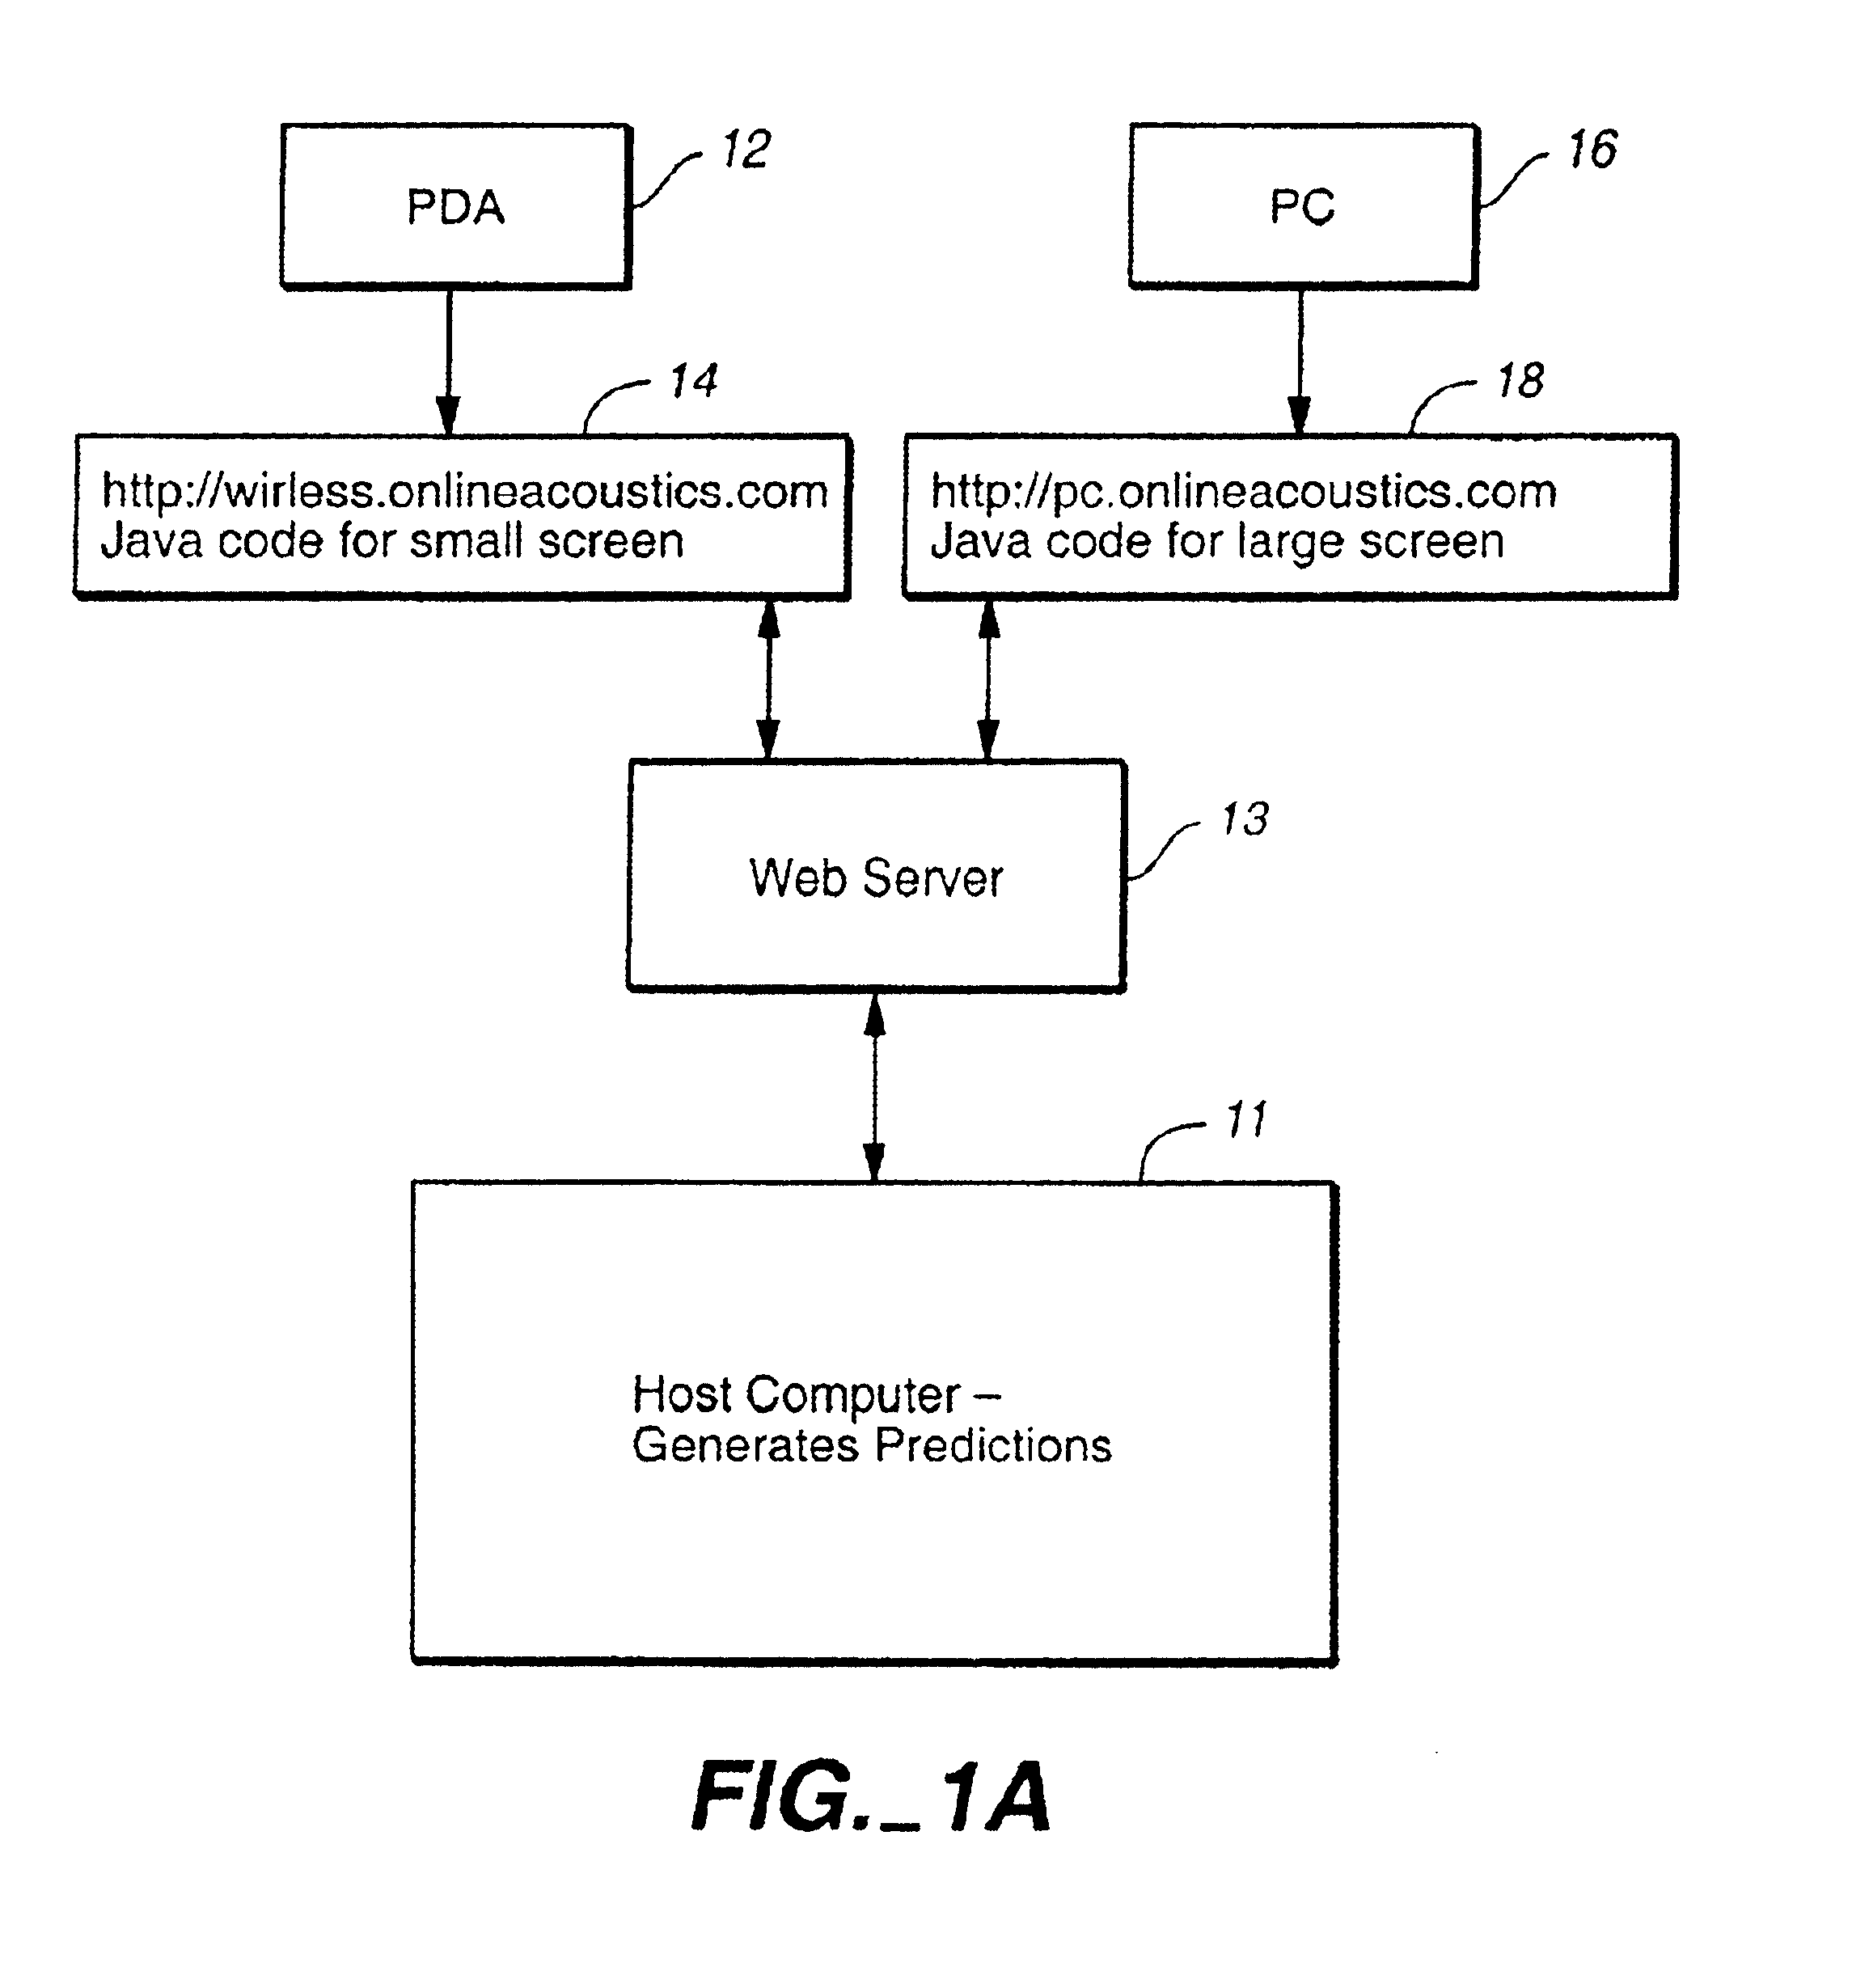 System and method for producing acoustic response predictions via a communications network